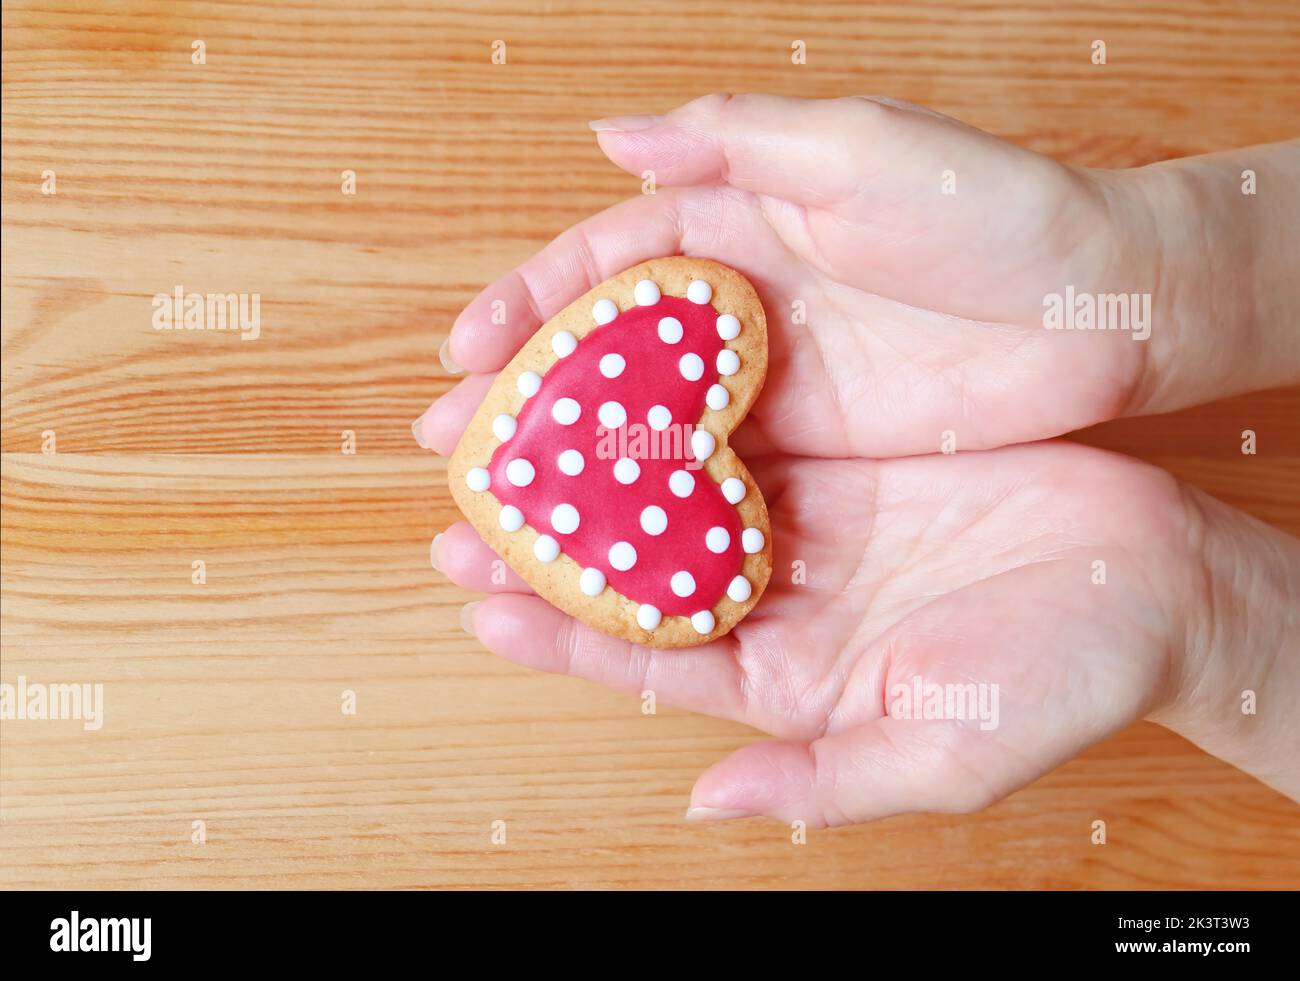 Red and white heart shaped royal icing cookie in woman's hand on wooden background Stock Photo